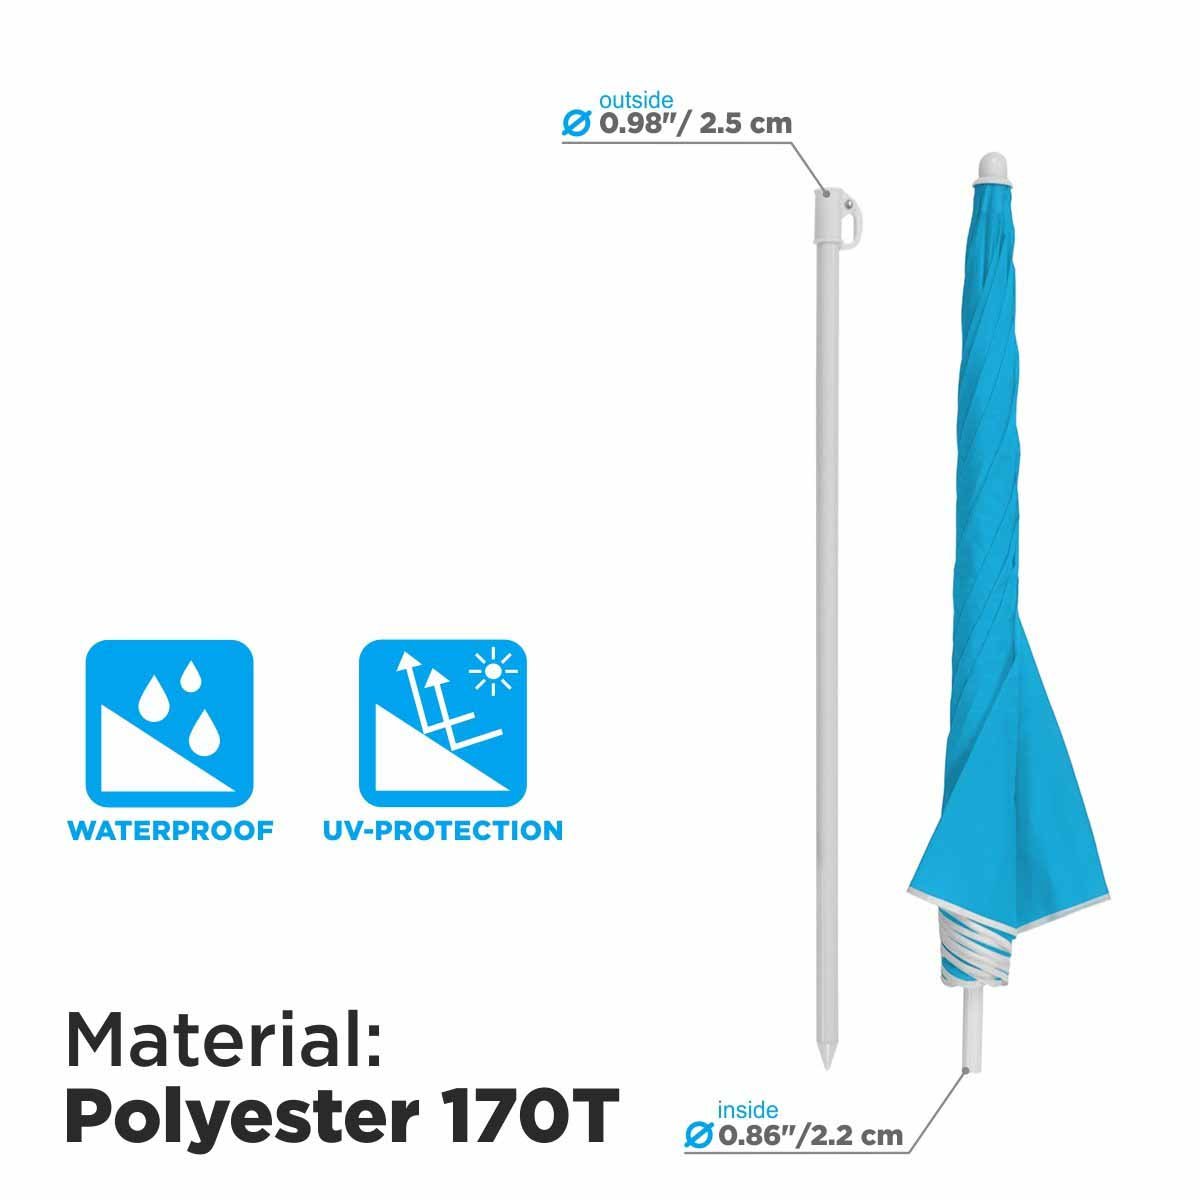 Blue Folding Beach Umbrella is made of waterproof polyester 170T featuring UV protection